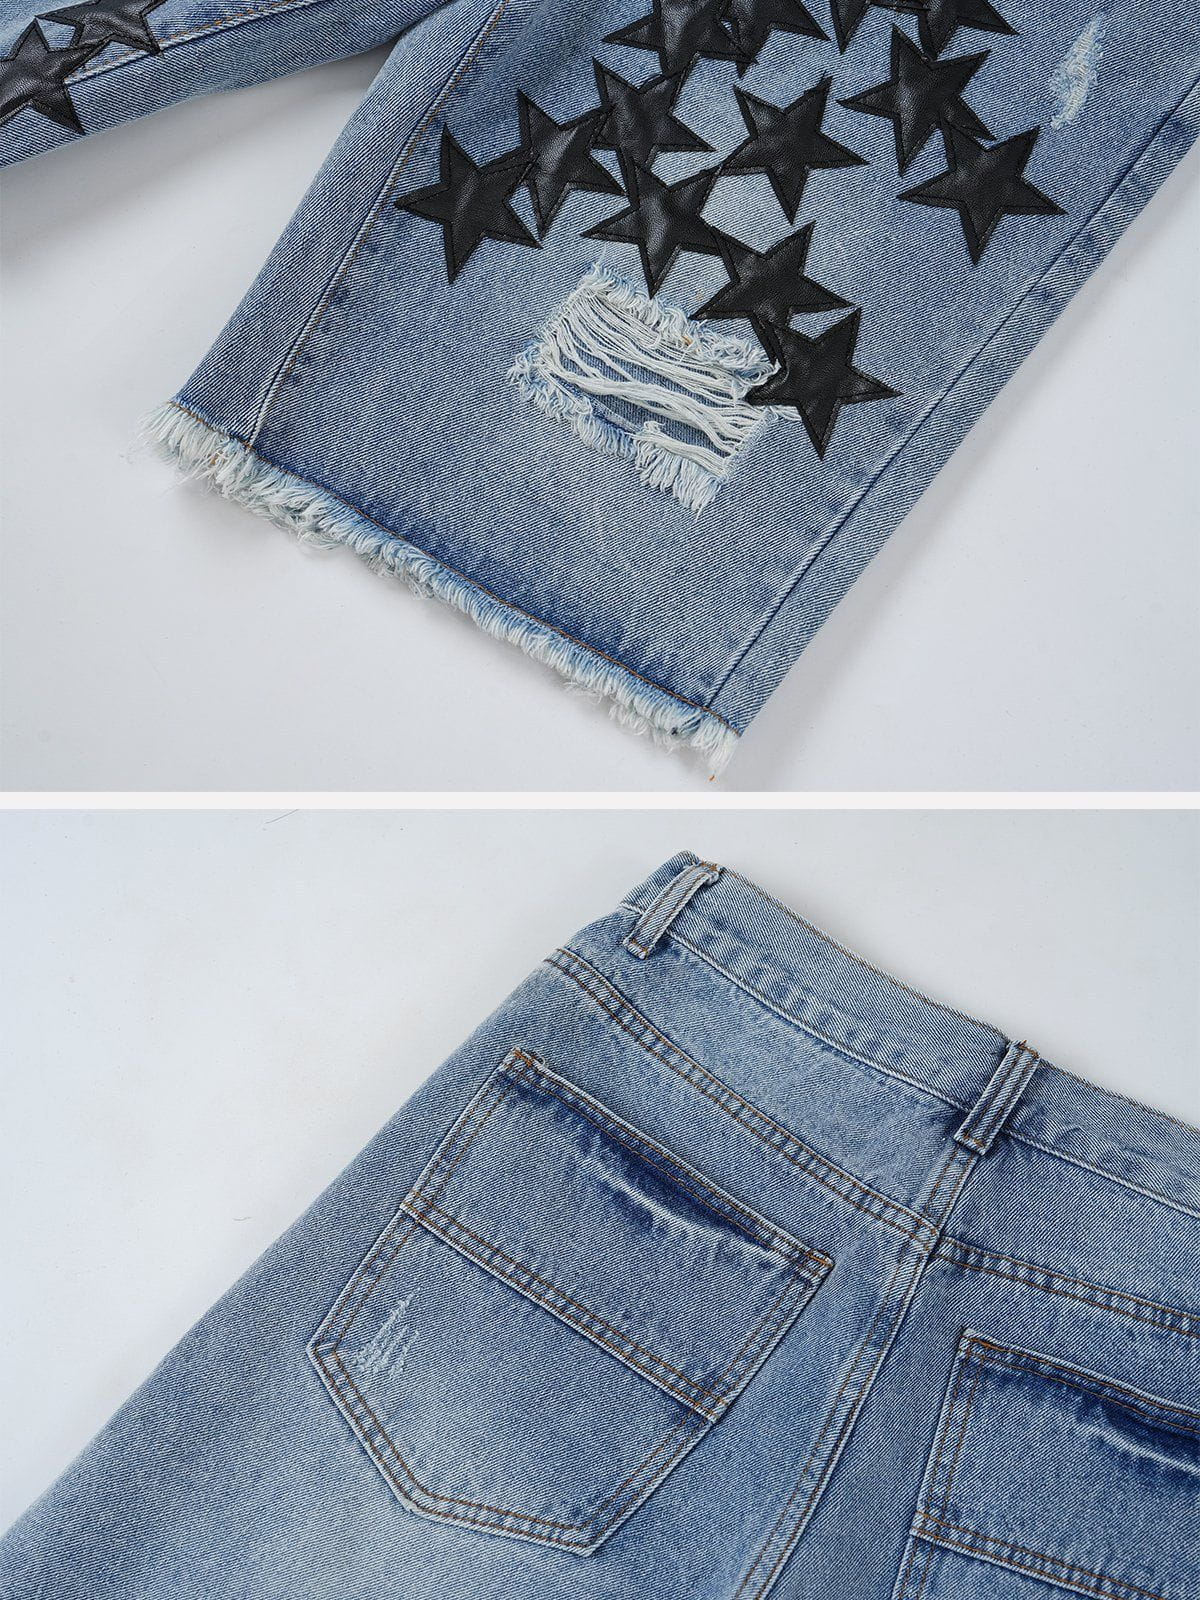 WLS Embroidery Star Denim Shorts